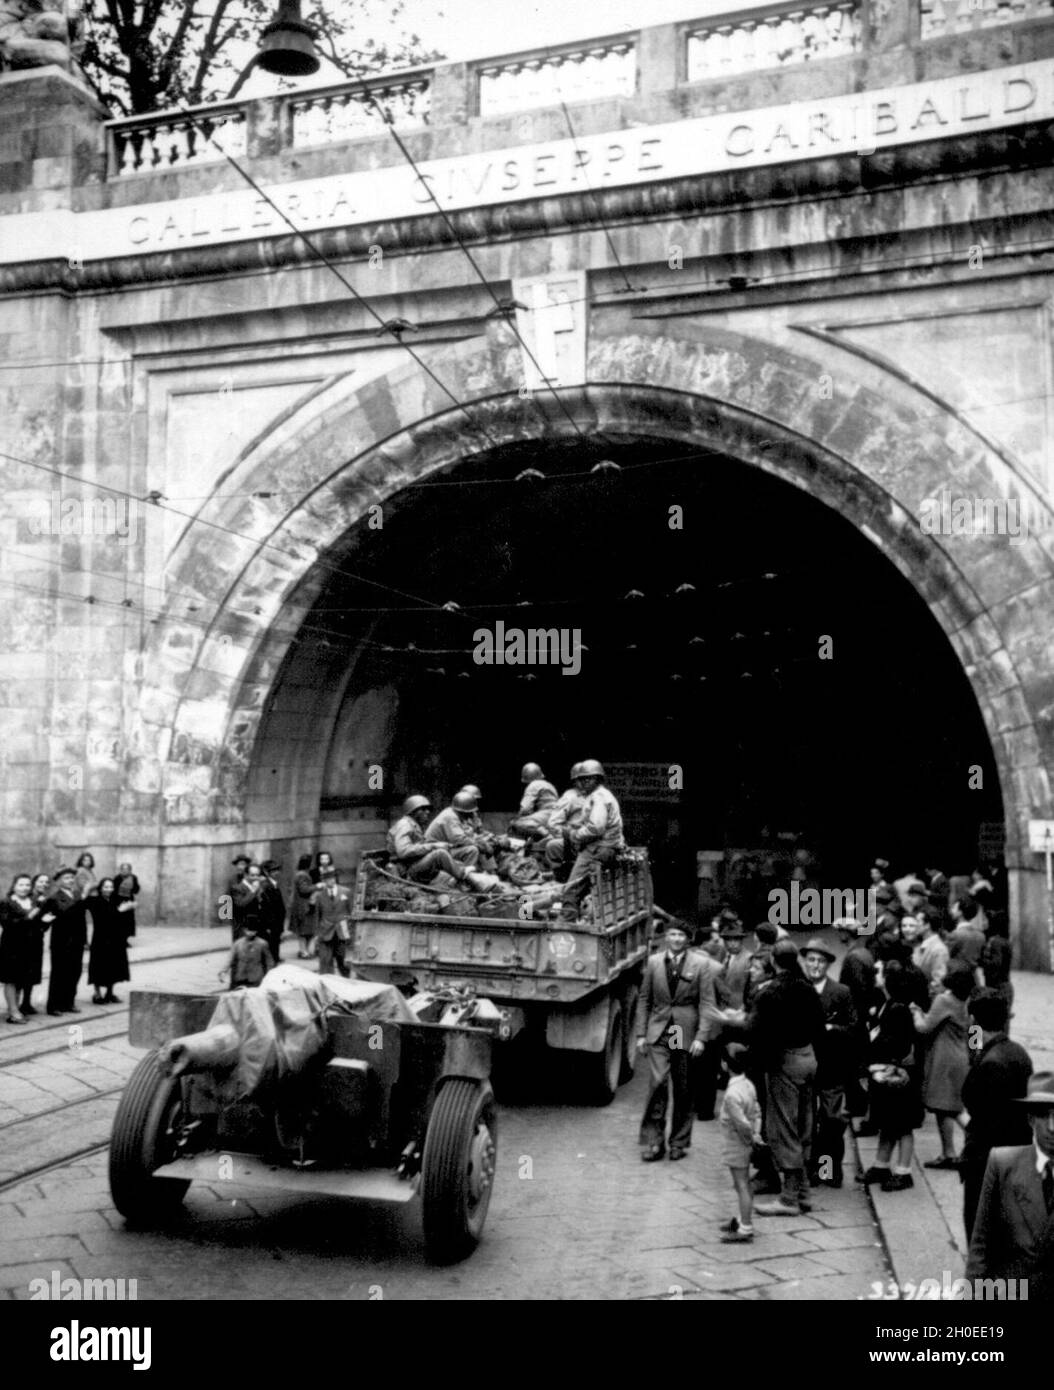 In the newly liberated city of Genoa, Italy, the 92nd Infantry Division troops enter the Galleria Guiseppe Garibaldi, April 27, 1945. Stock Photo